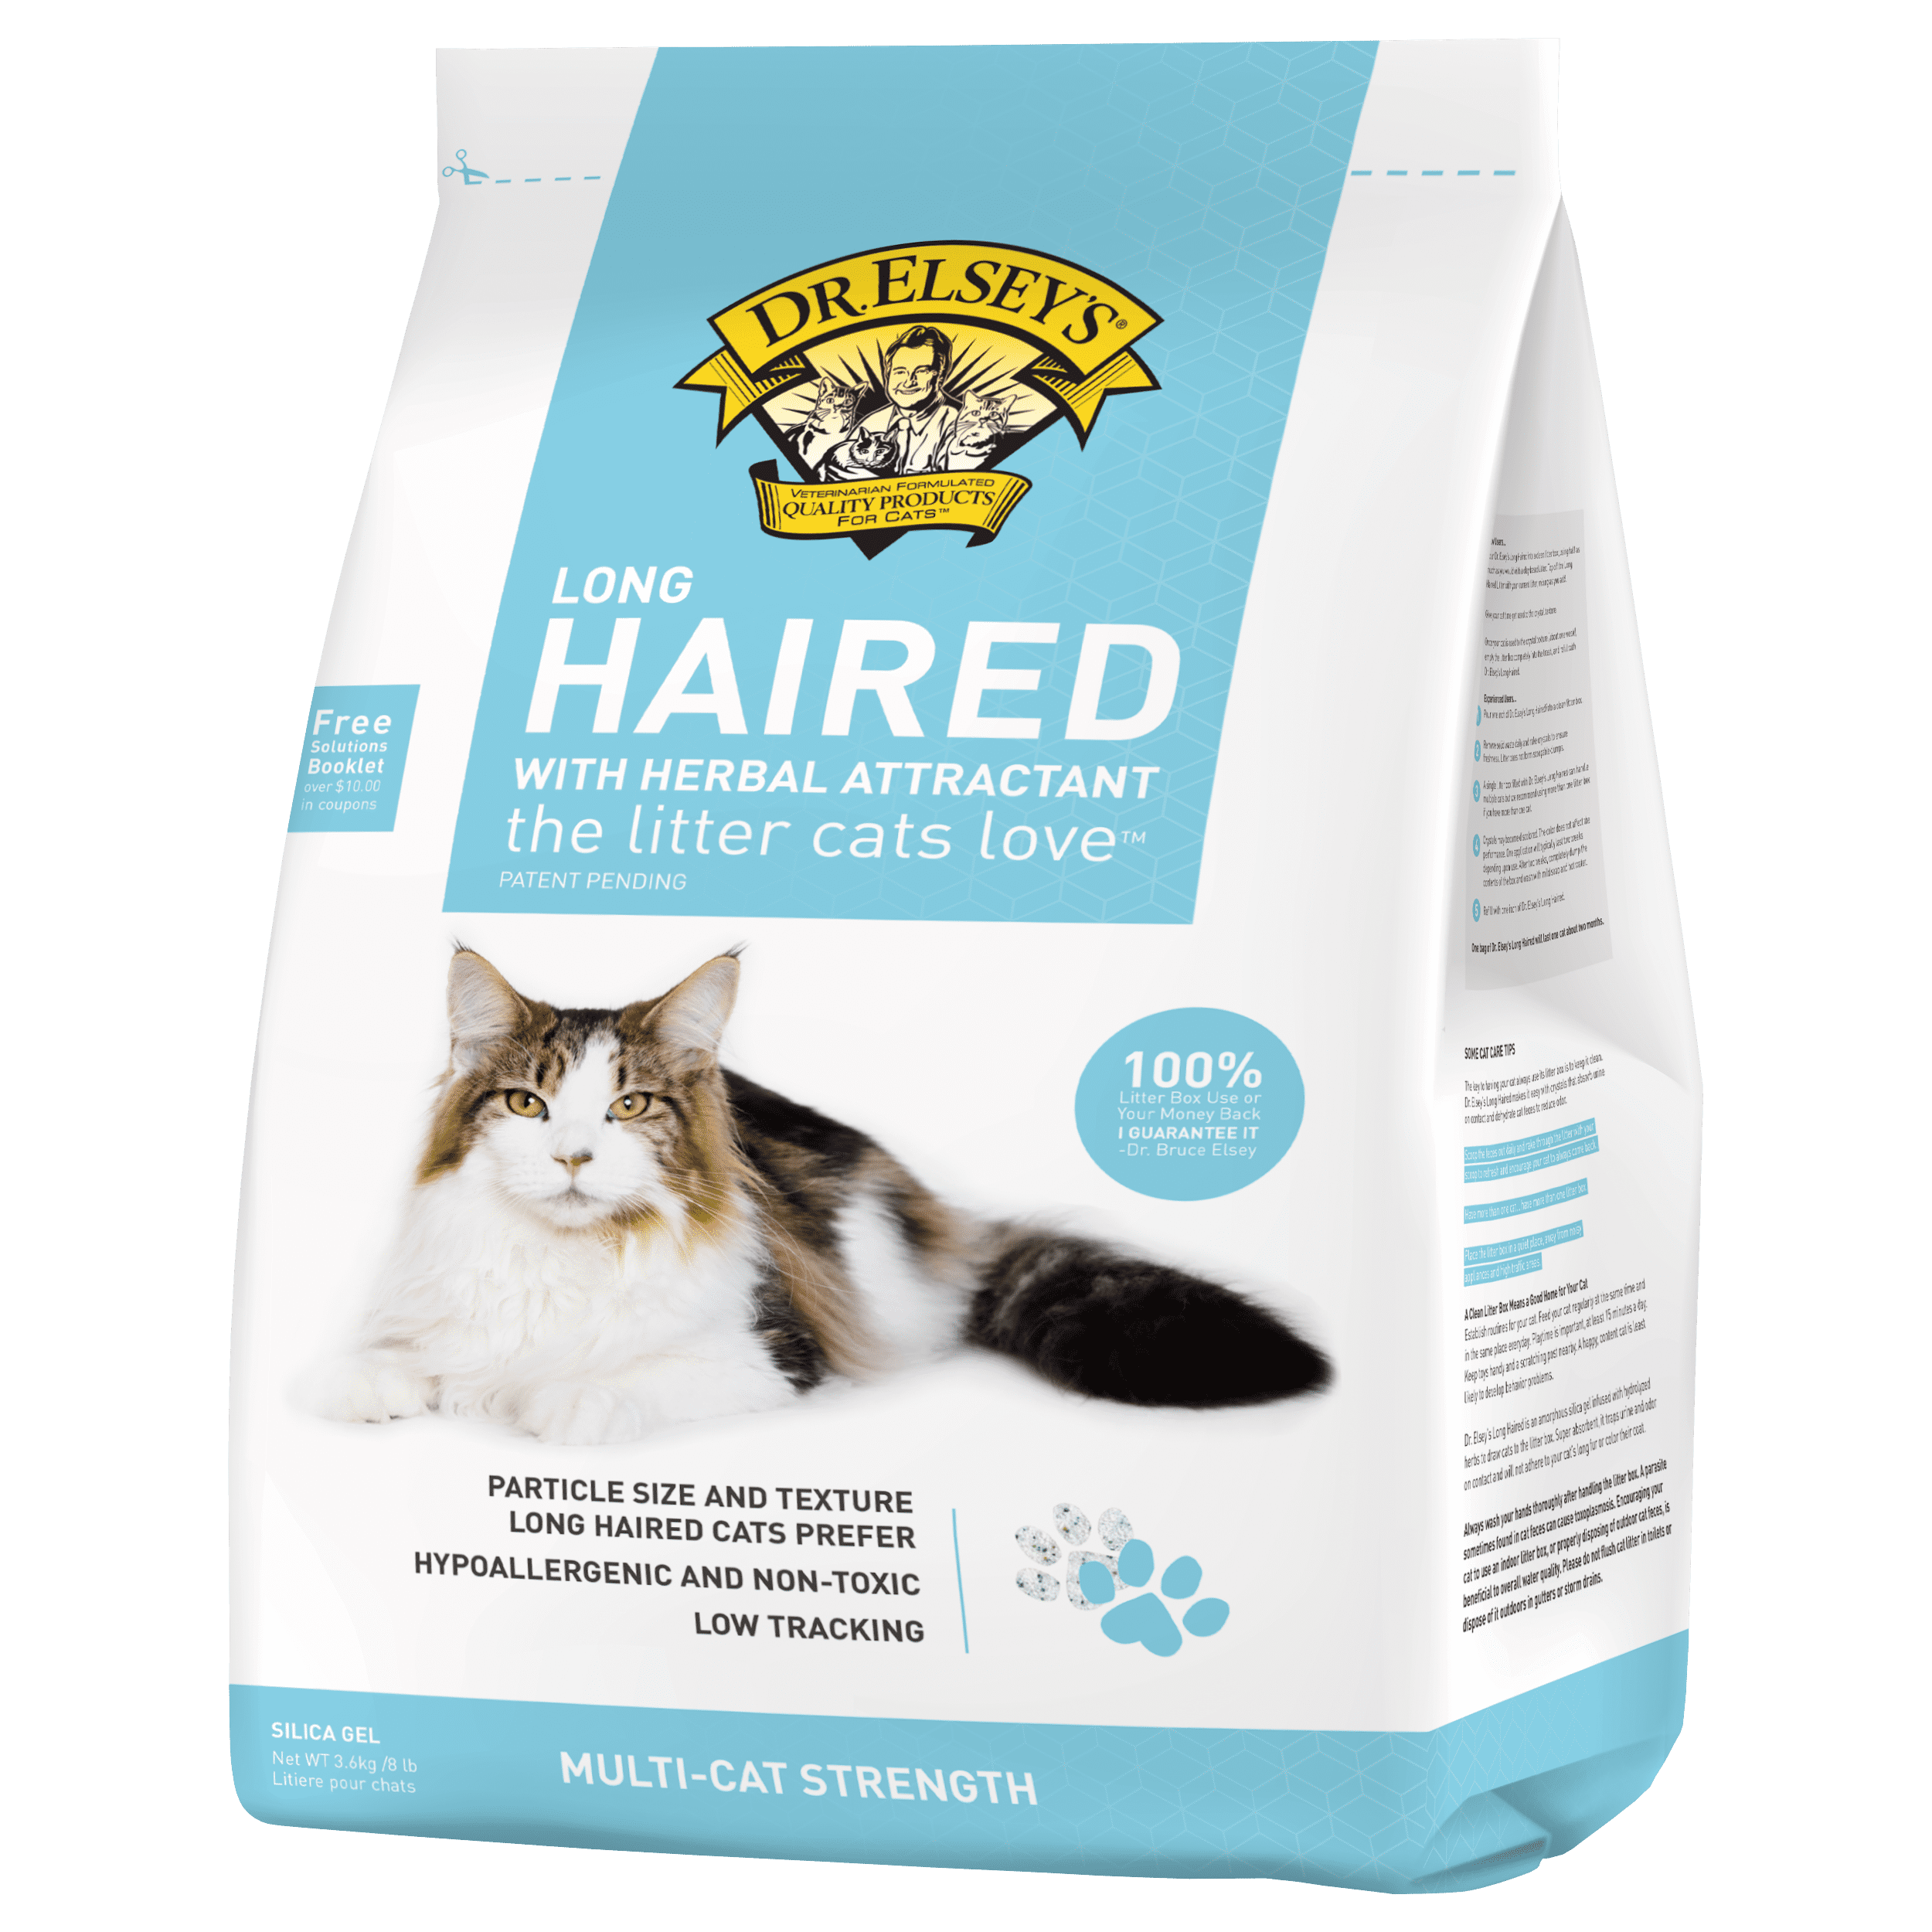 Dr. Elsey's Precious Cat Long Haired Silica Crystal Cat Litter, 8 Lb